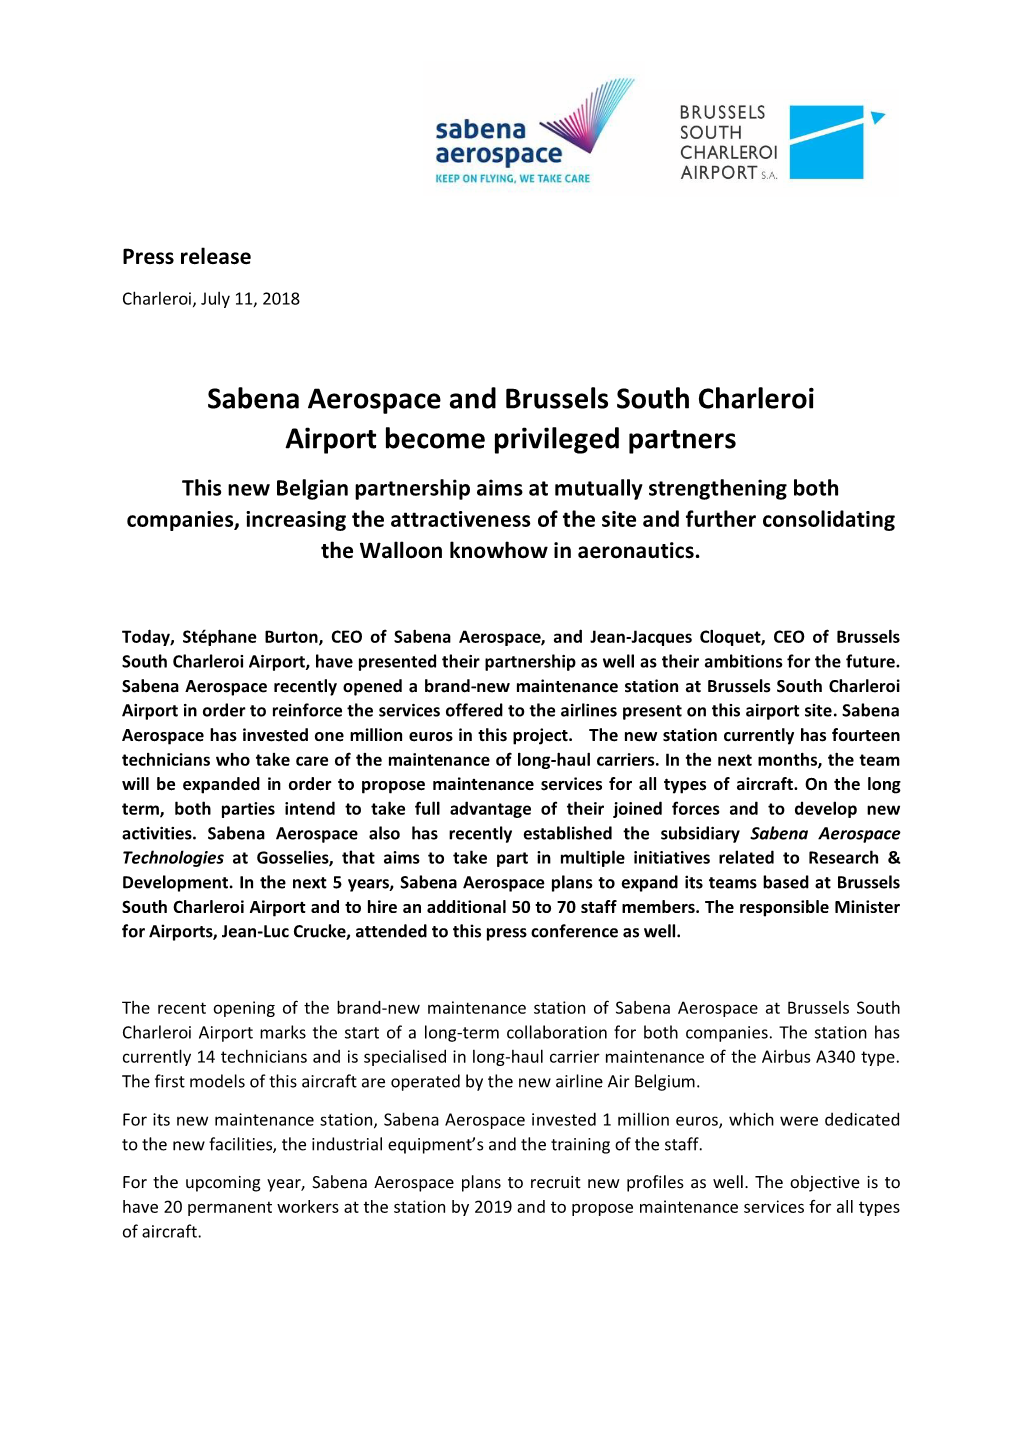 Sabena Aerospace and Brussels South Charleroi Airport Become